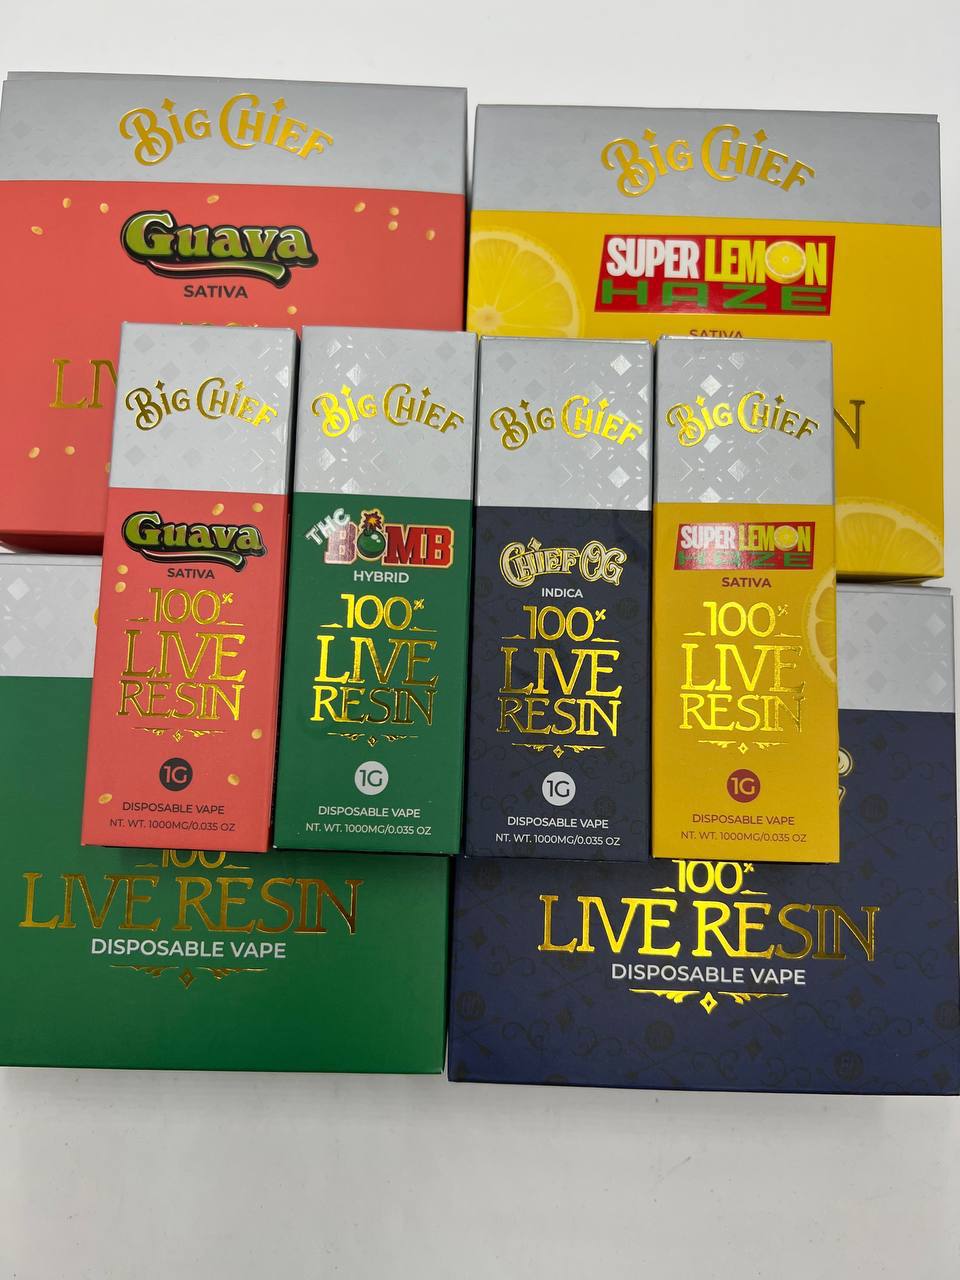 BIG CHIEF LIVE RESIN 1g DISPOSABLE